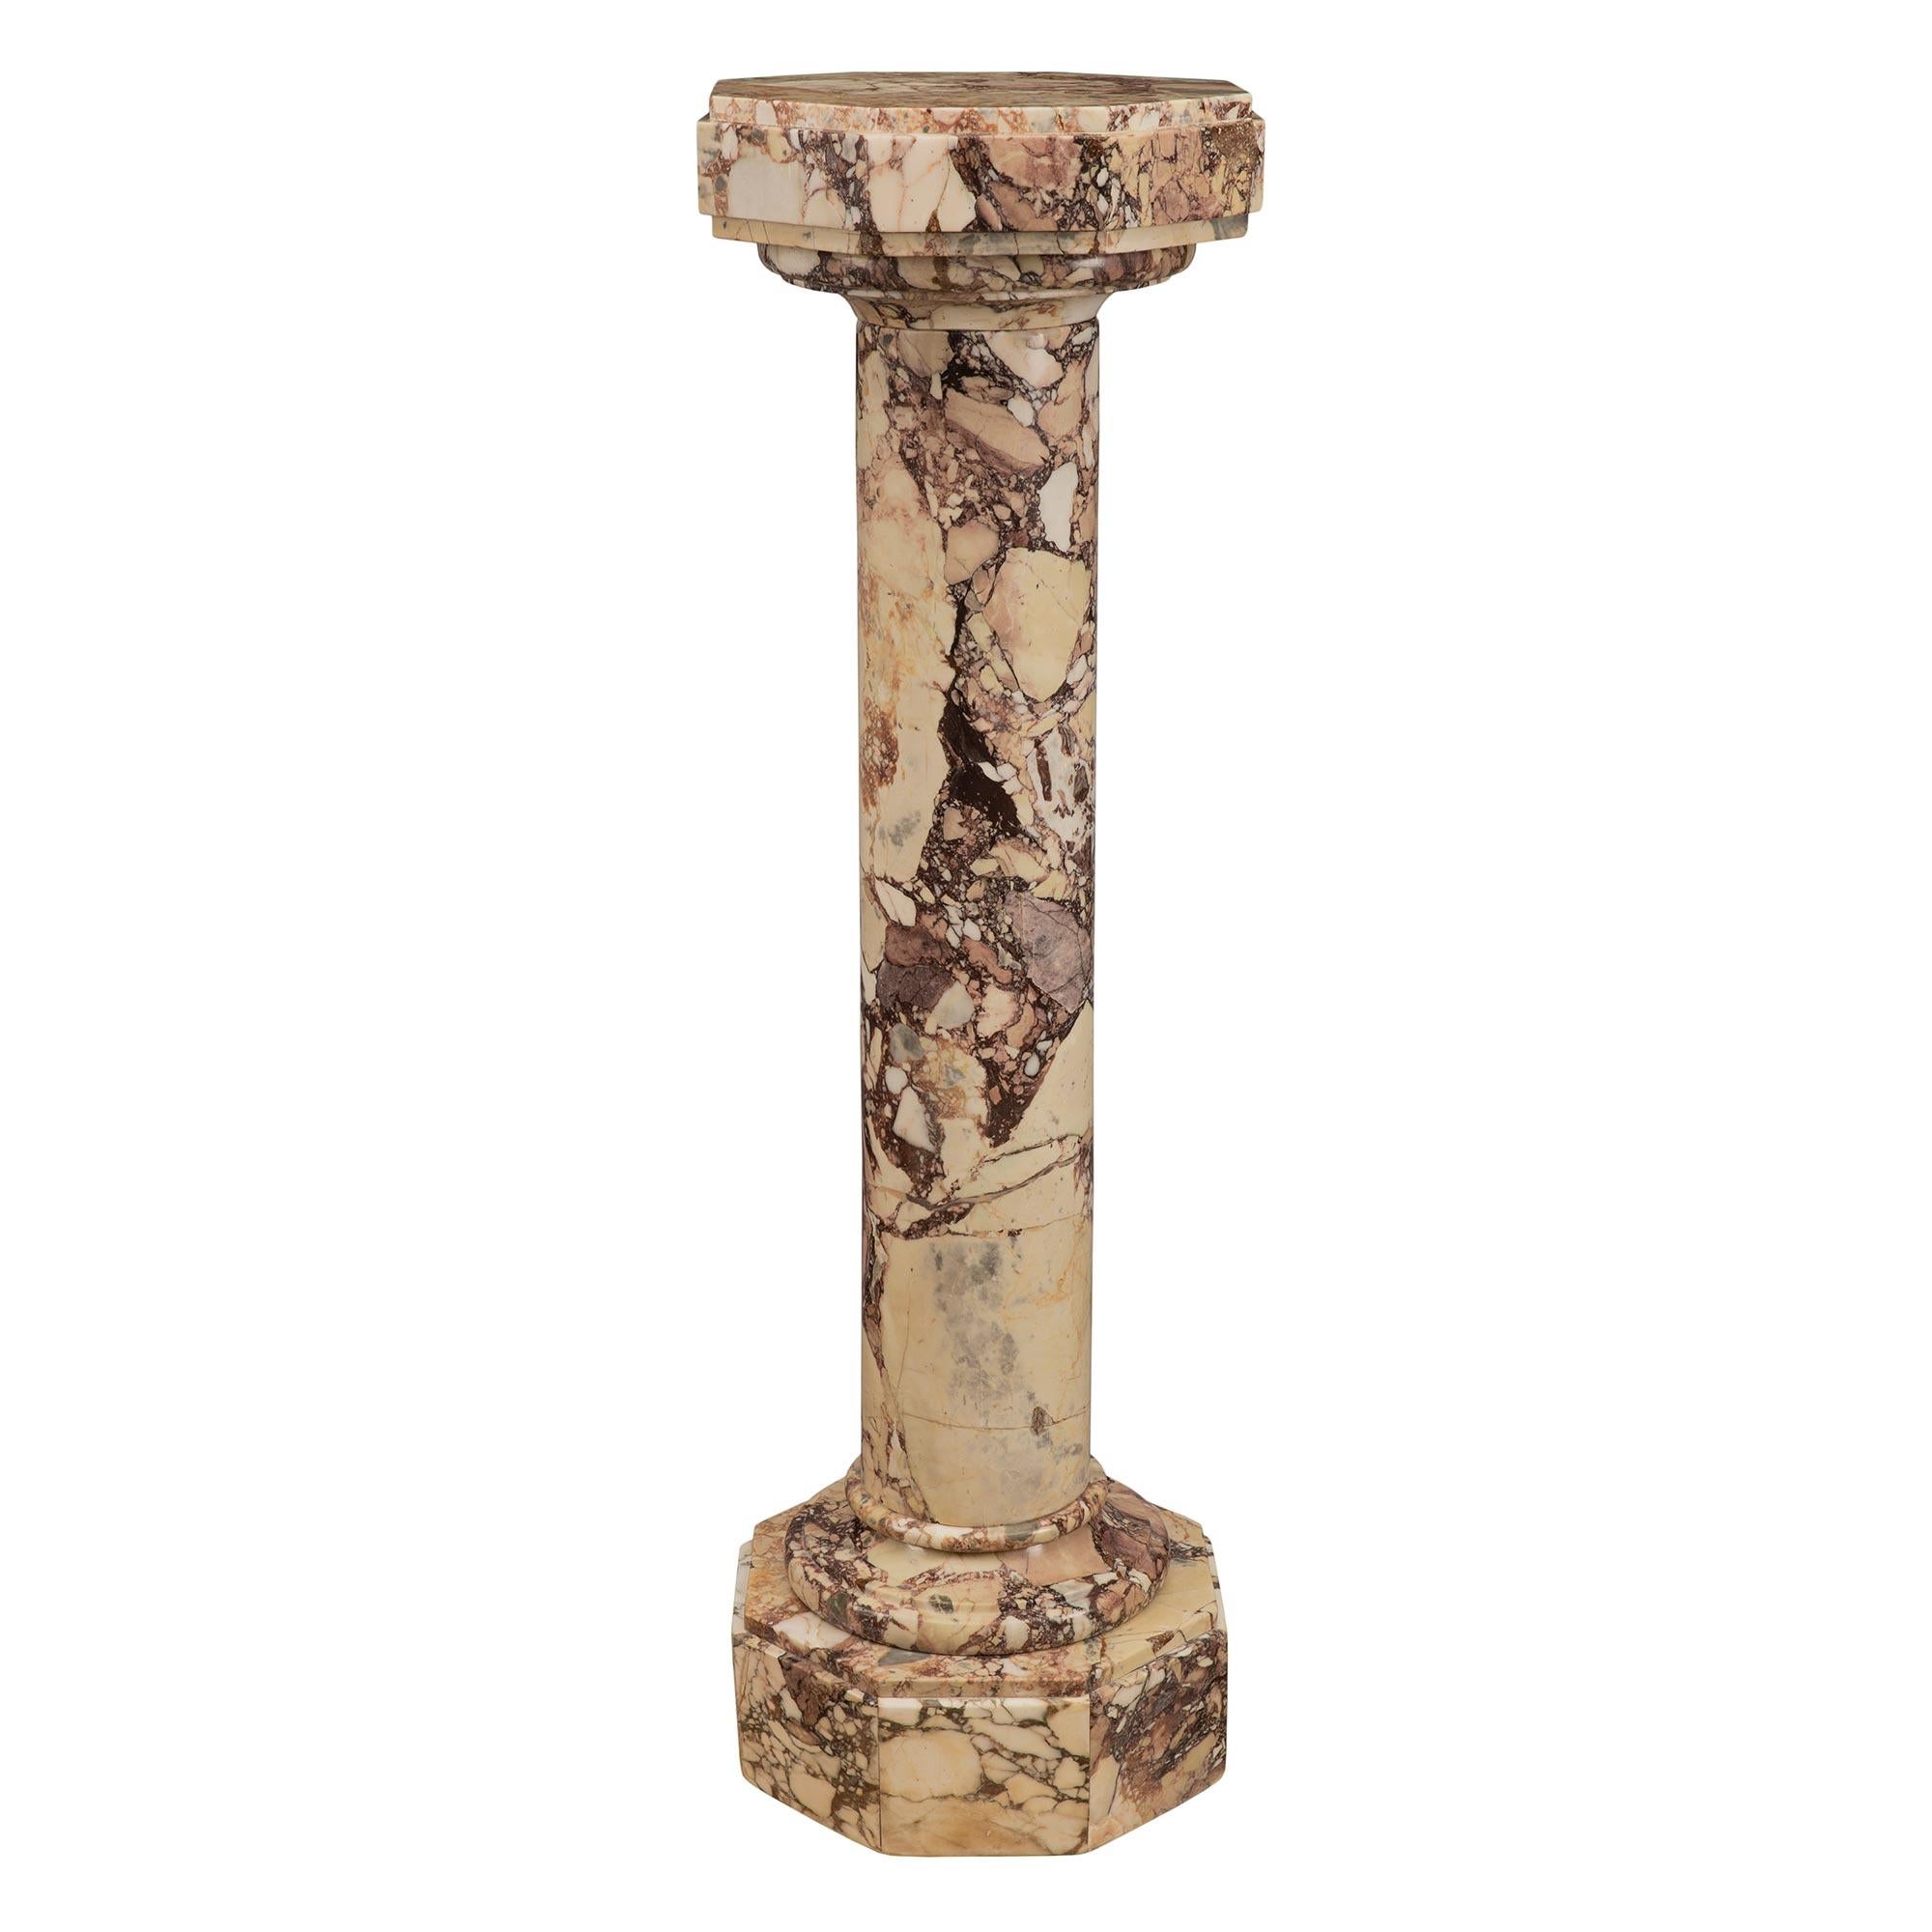 A fine Italian 19th century Brèche Violet marble pedestal column. The pedestal is raised by an octagonal base with a stepped border below the circular mottled band and central support. Above is the same elegant and most decorative circular mottled